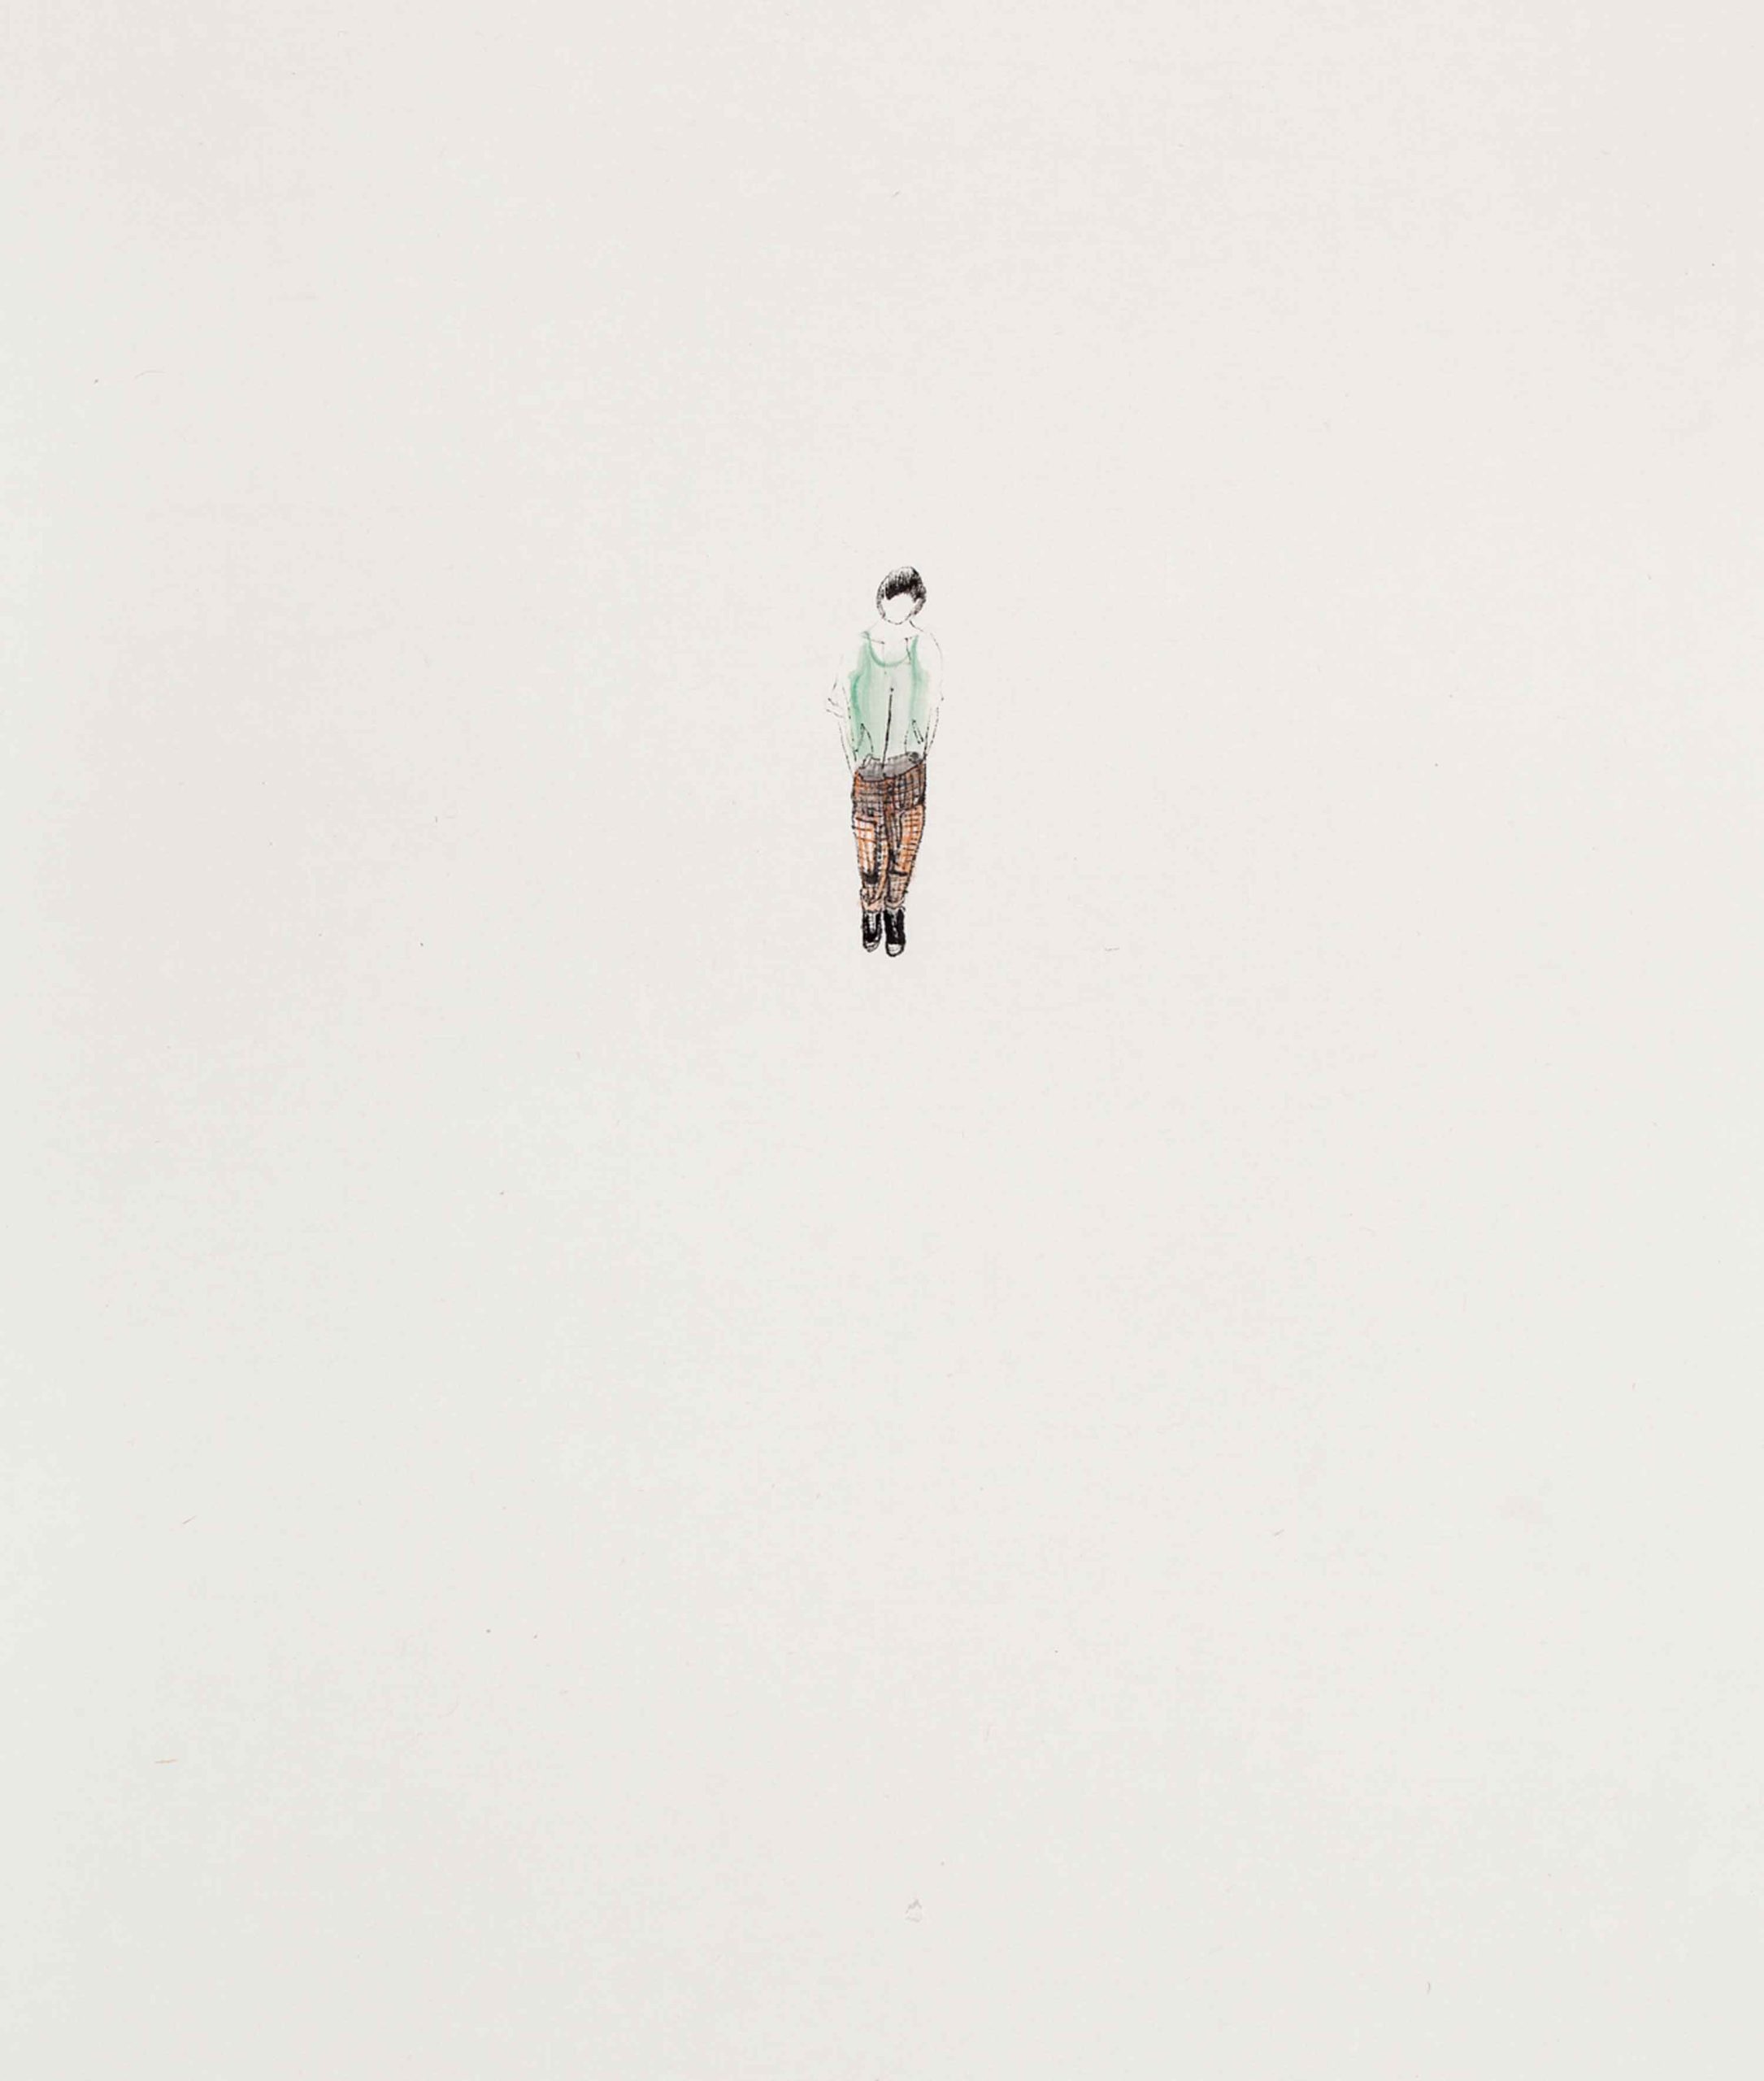 Gao Ping, Girl, 2011, ink on paper, 45 x 36 cm